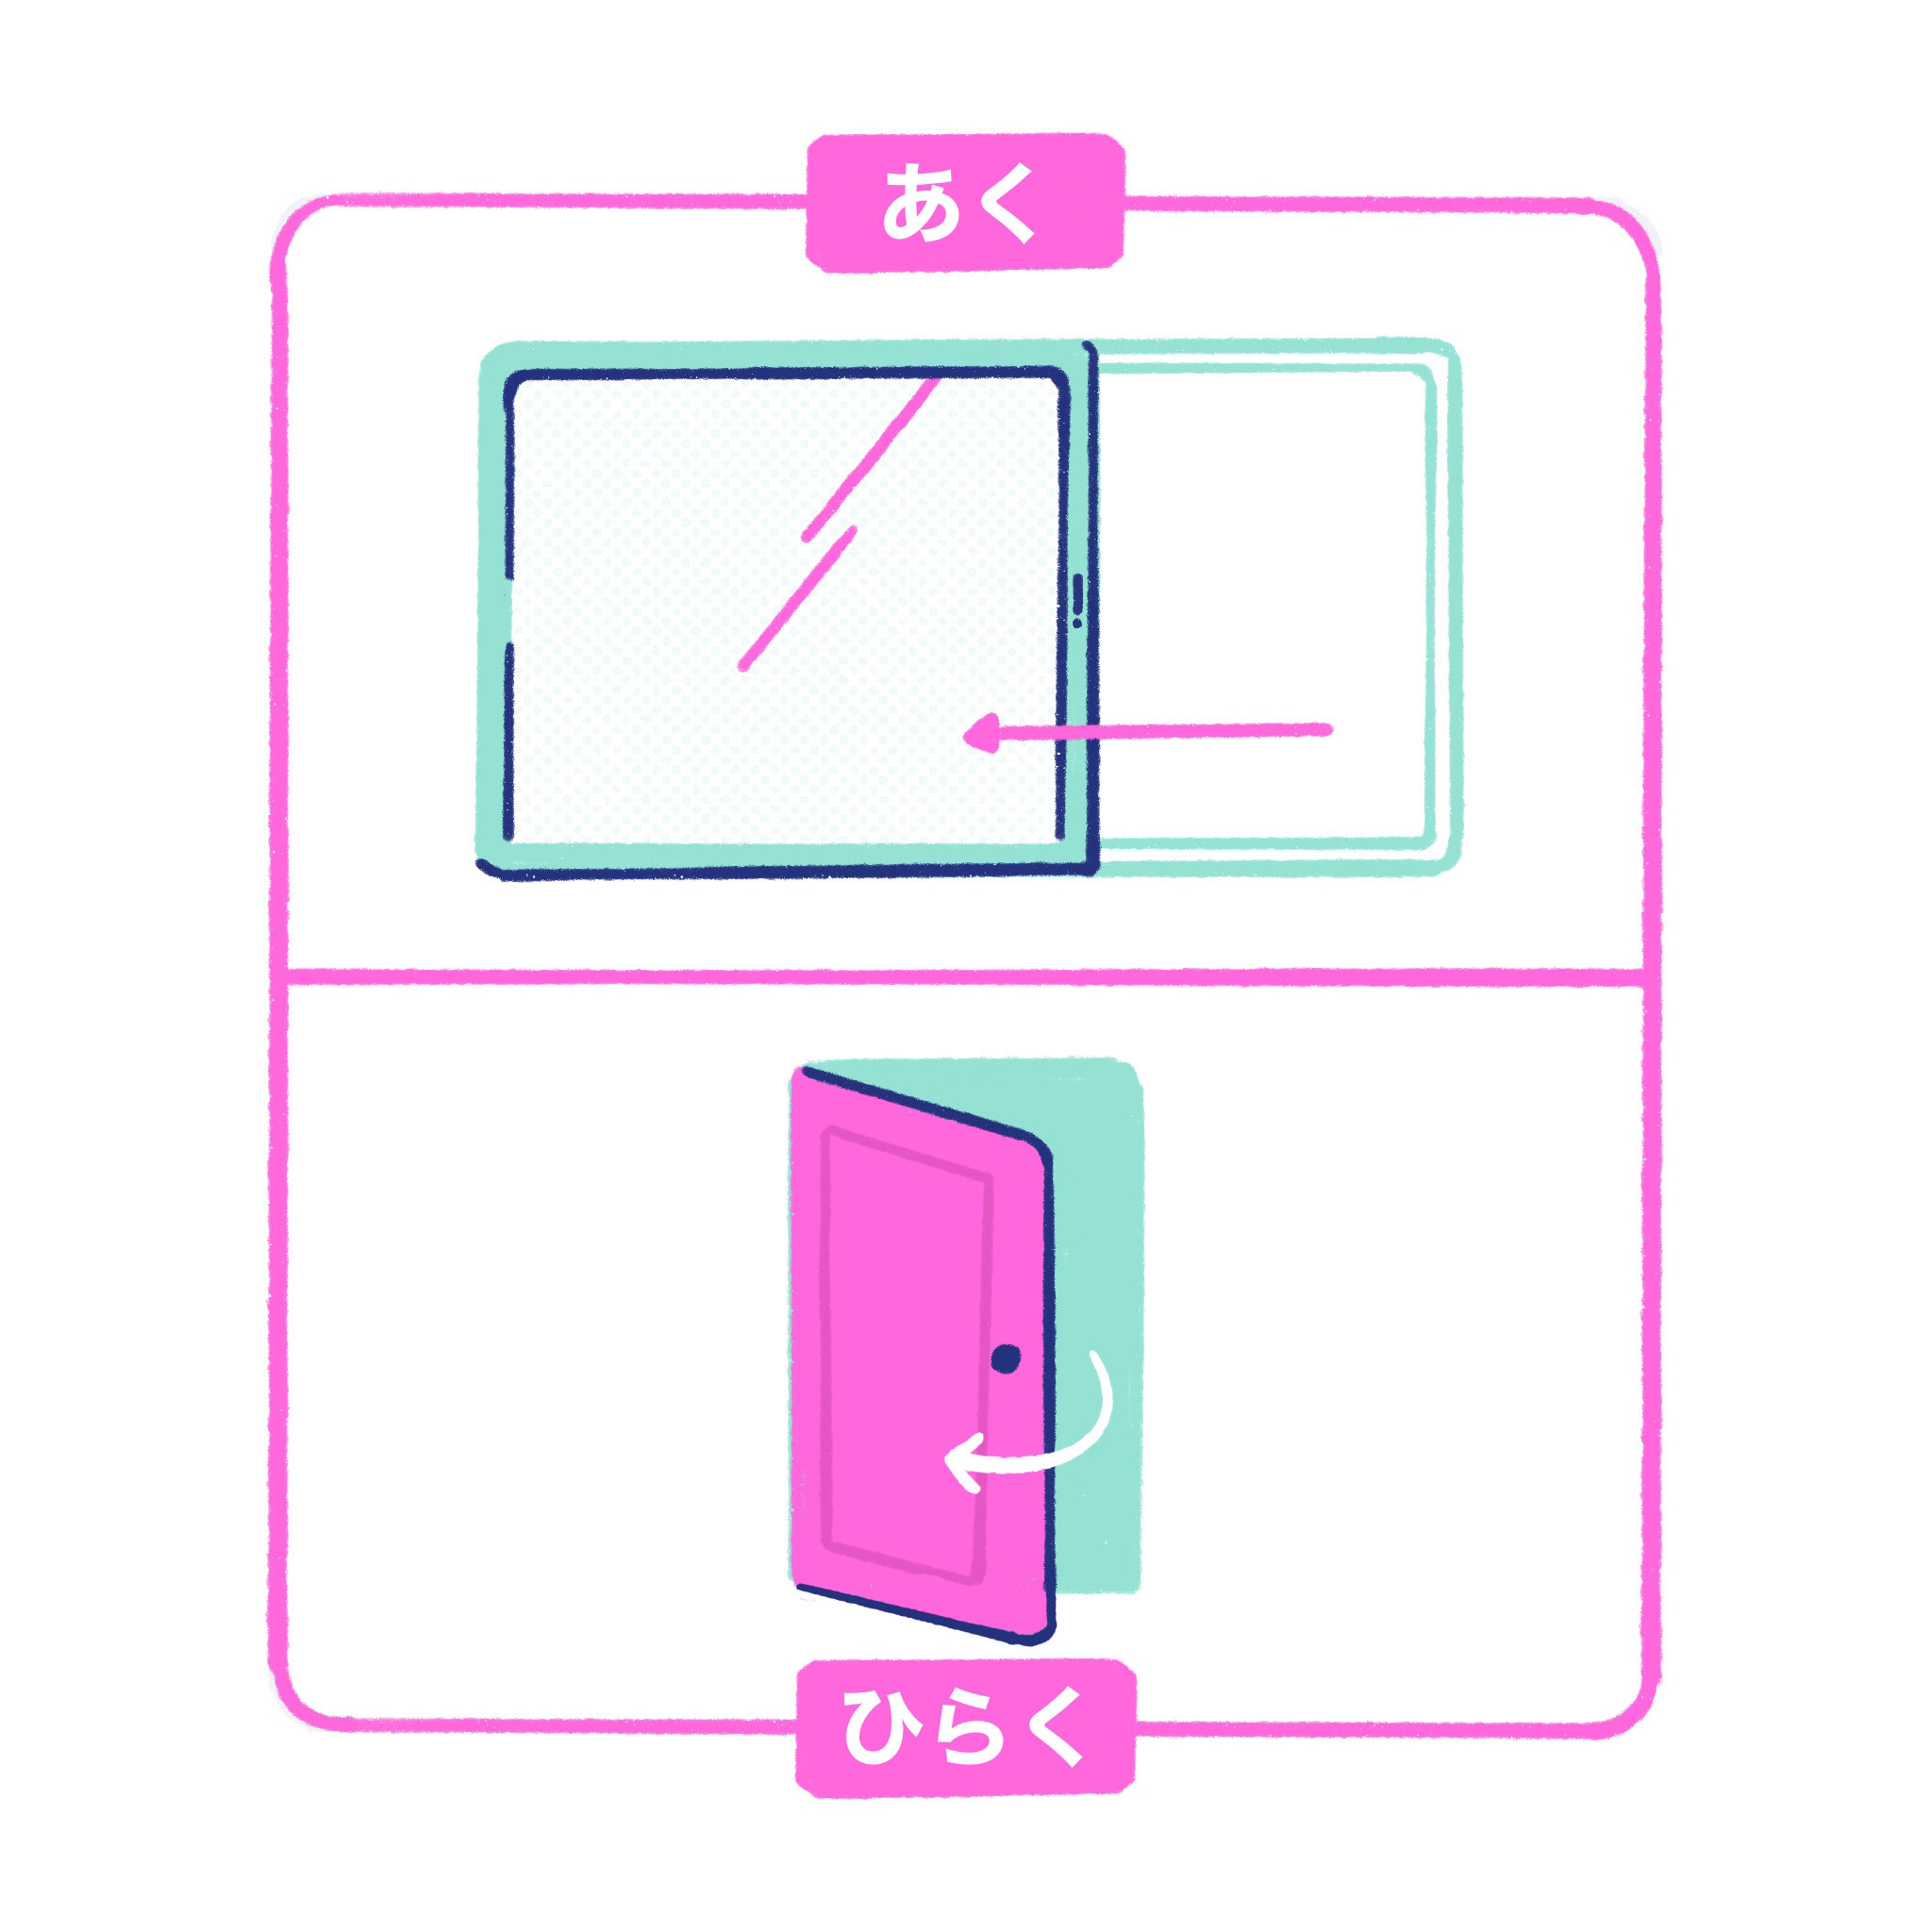 a sliding window for あく and an opening door for ひらく